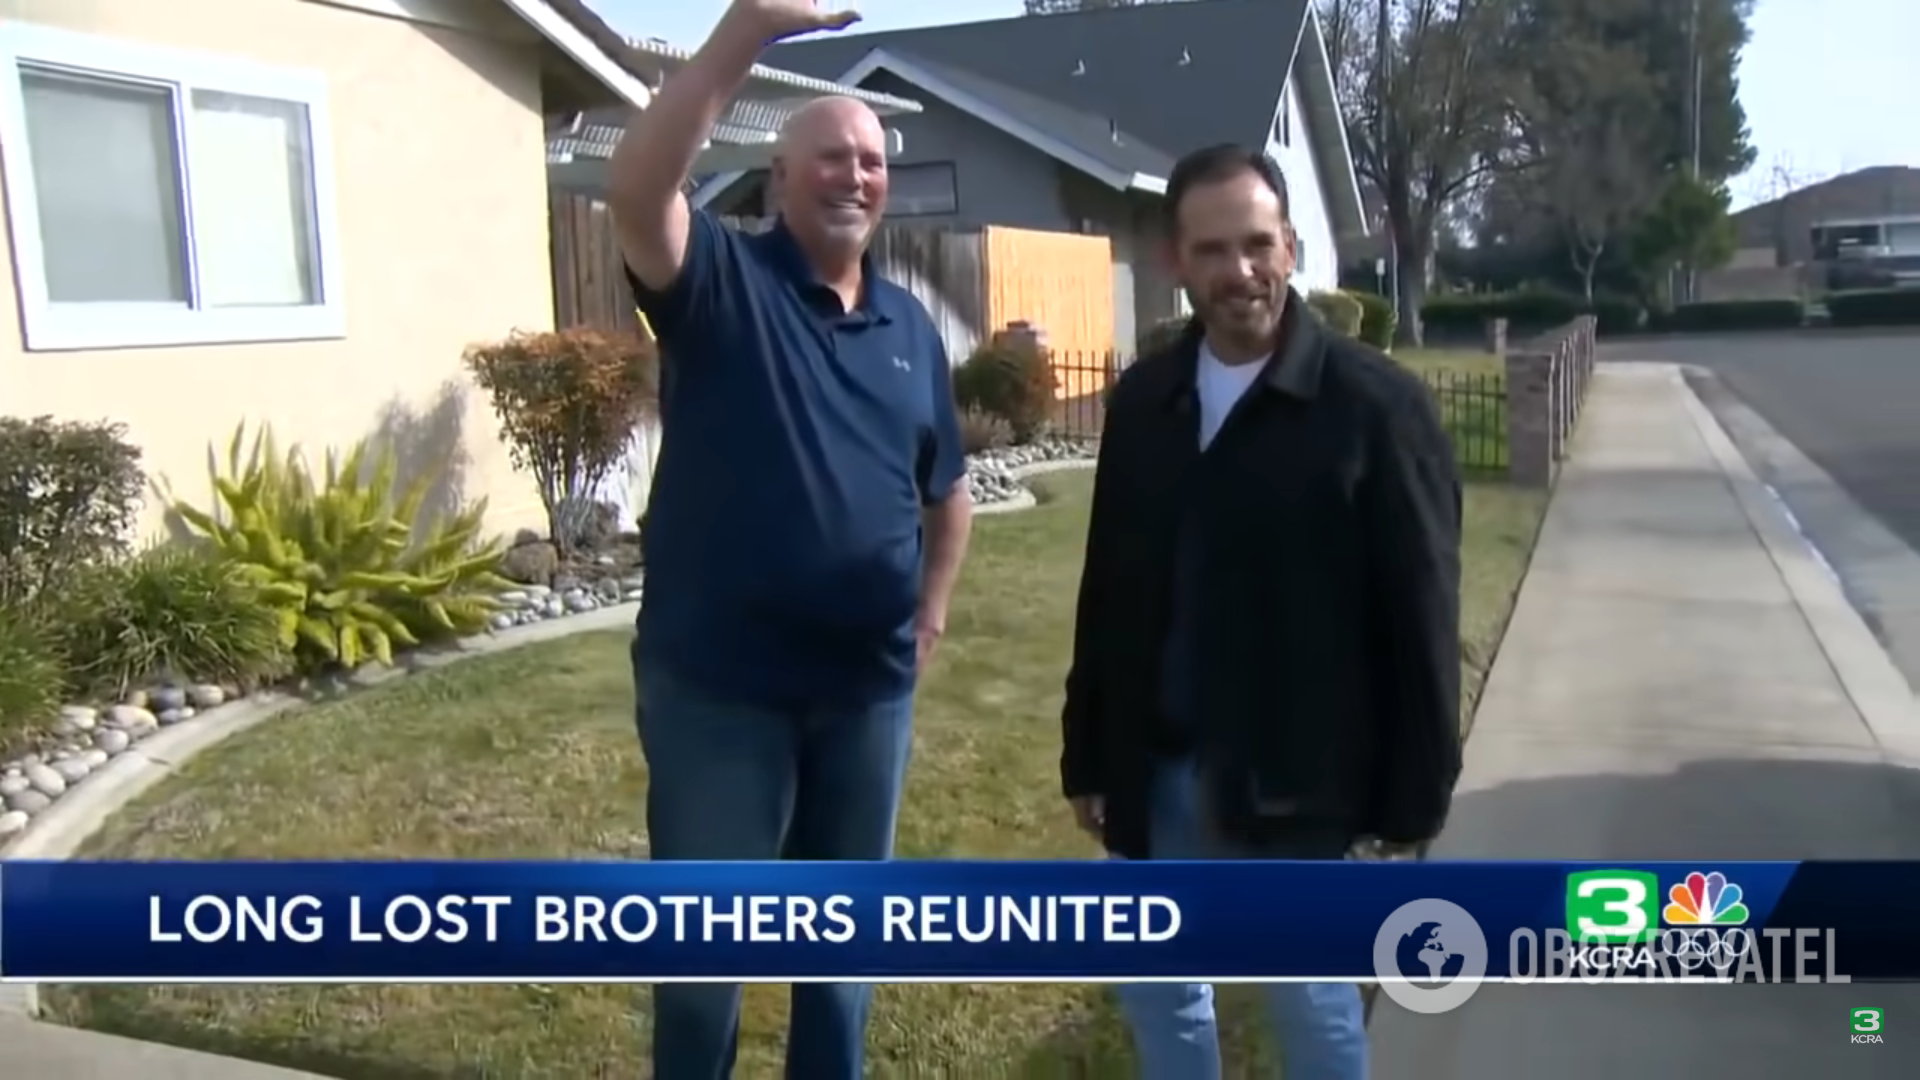 An American man met his brother by chance thanks to a weather forecast: the men hadn't realized each other existed for 50 years. Video.